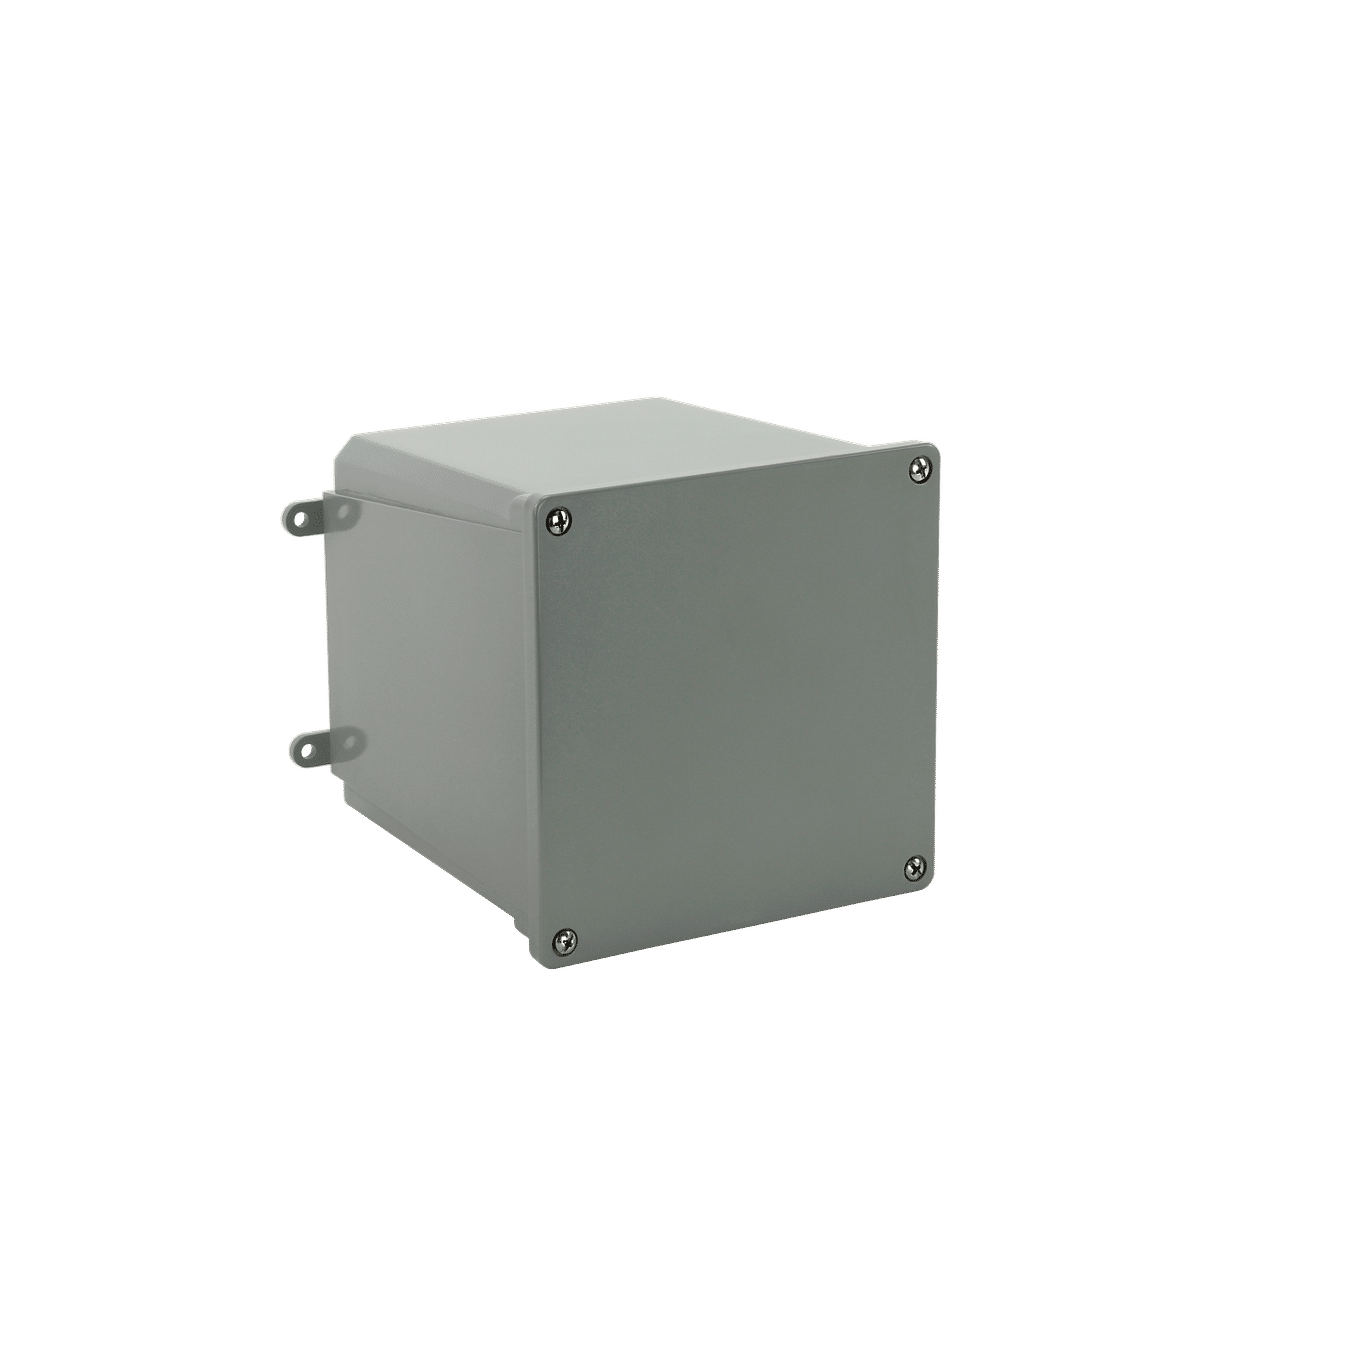 Outdoor Snow Melting Junction Box - Small - In-Ground